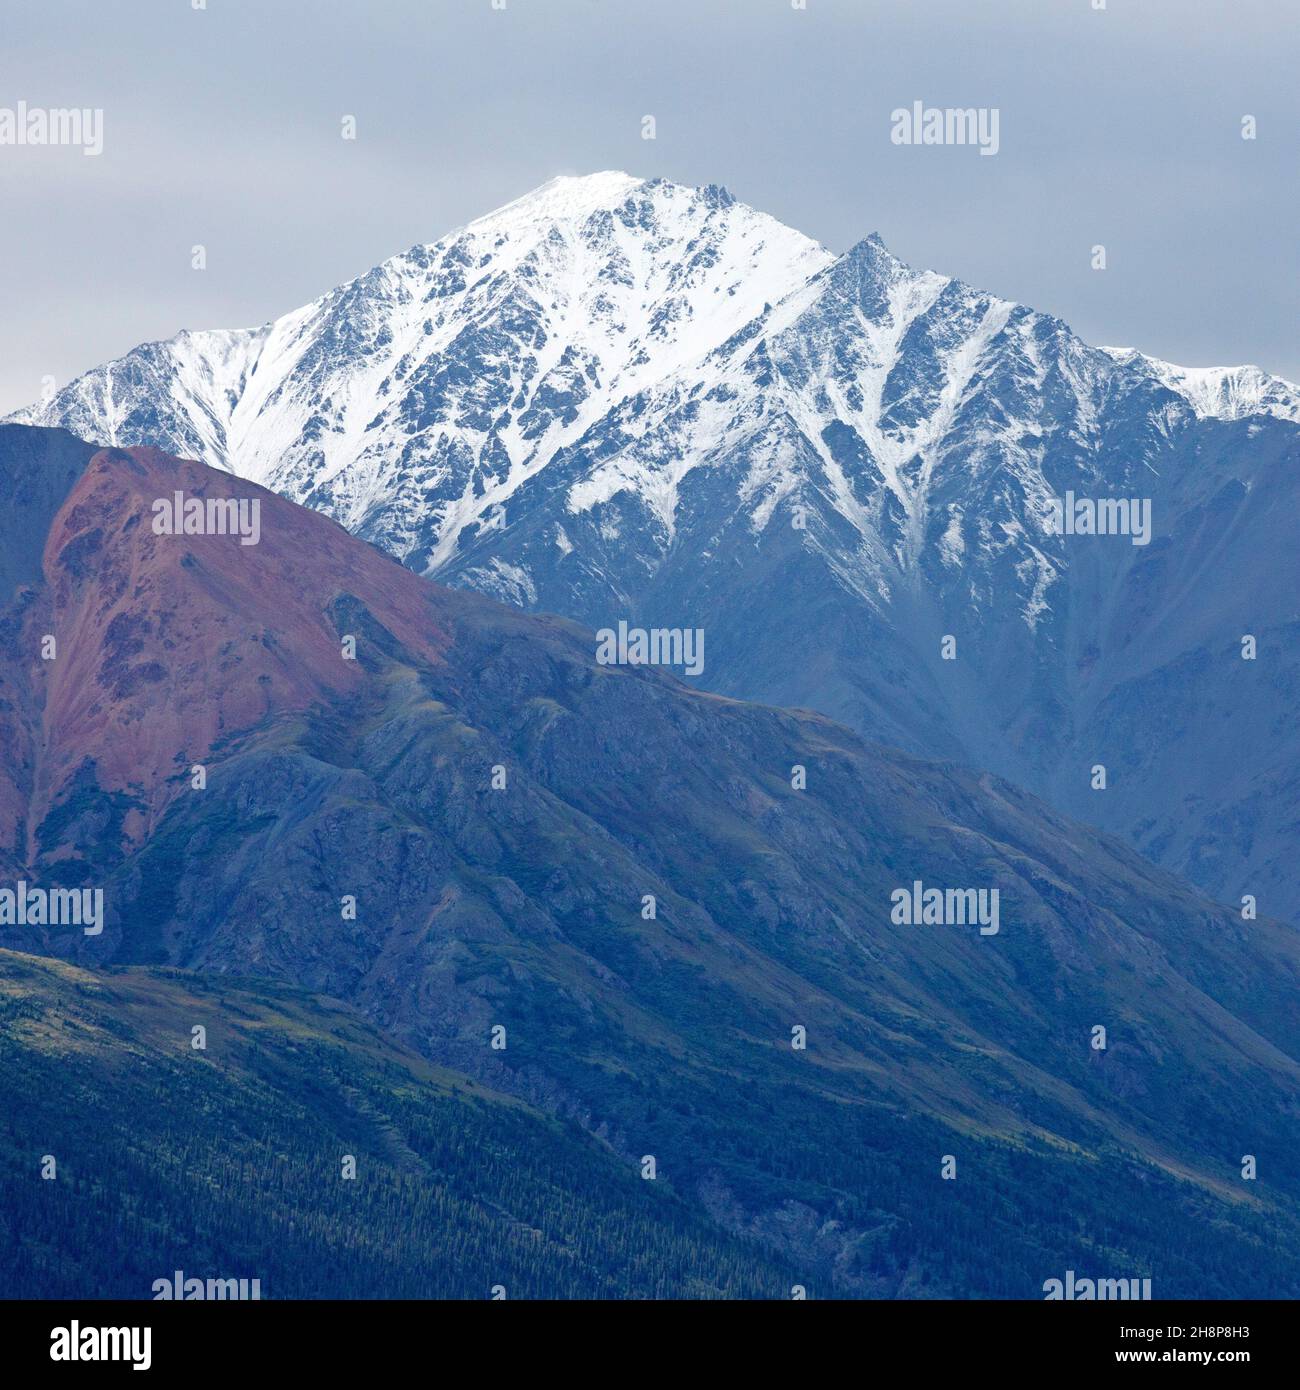 Mountains in Kluane National Park and Reserve in the Yukon, Canada. The parkland covers an expanse of more than 22,000 square kilometres. Stock Photo